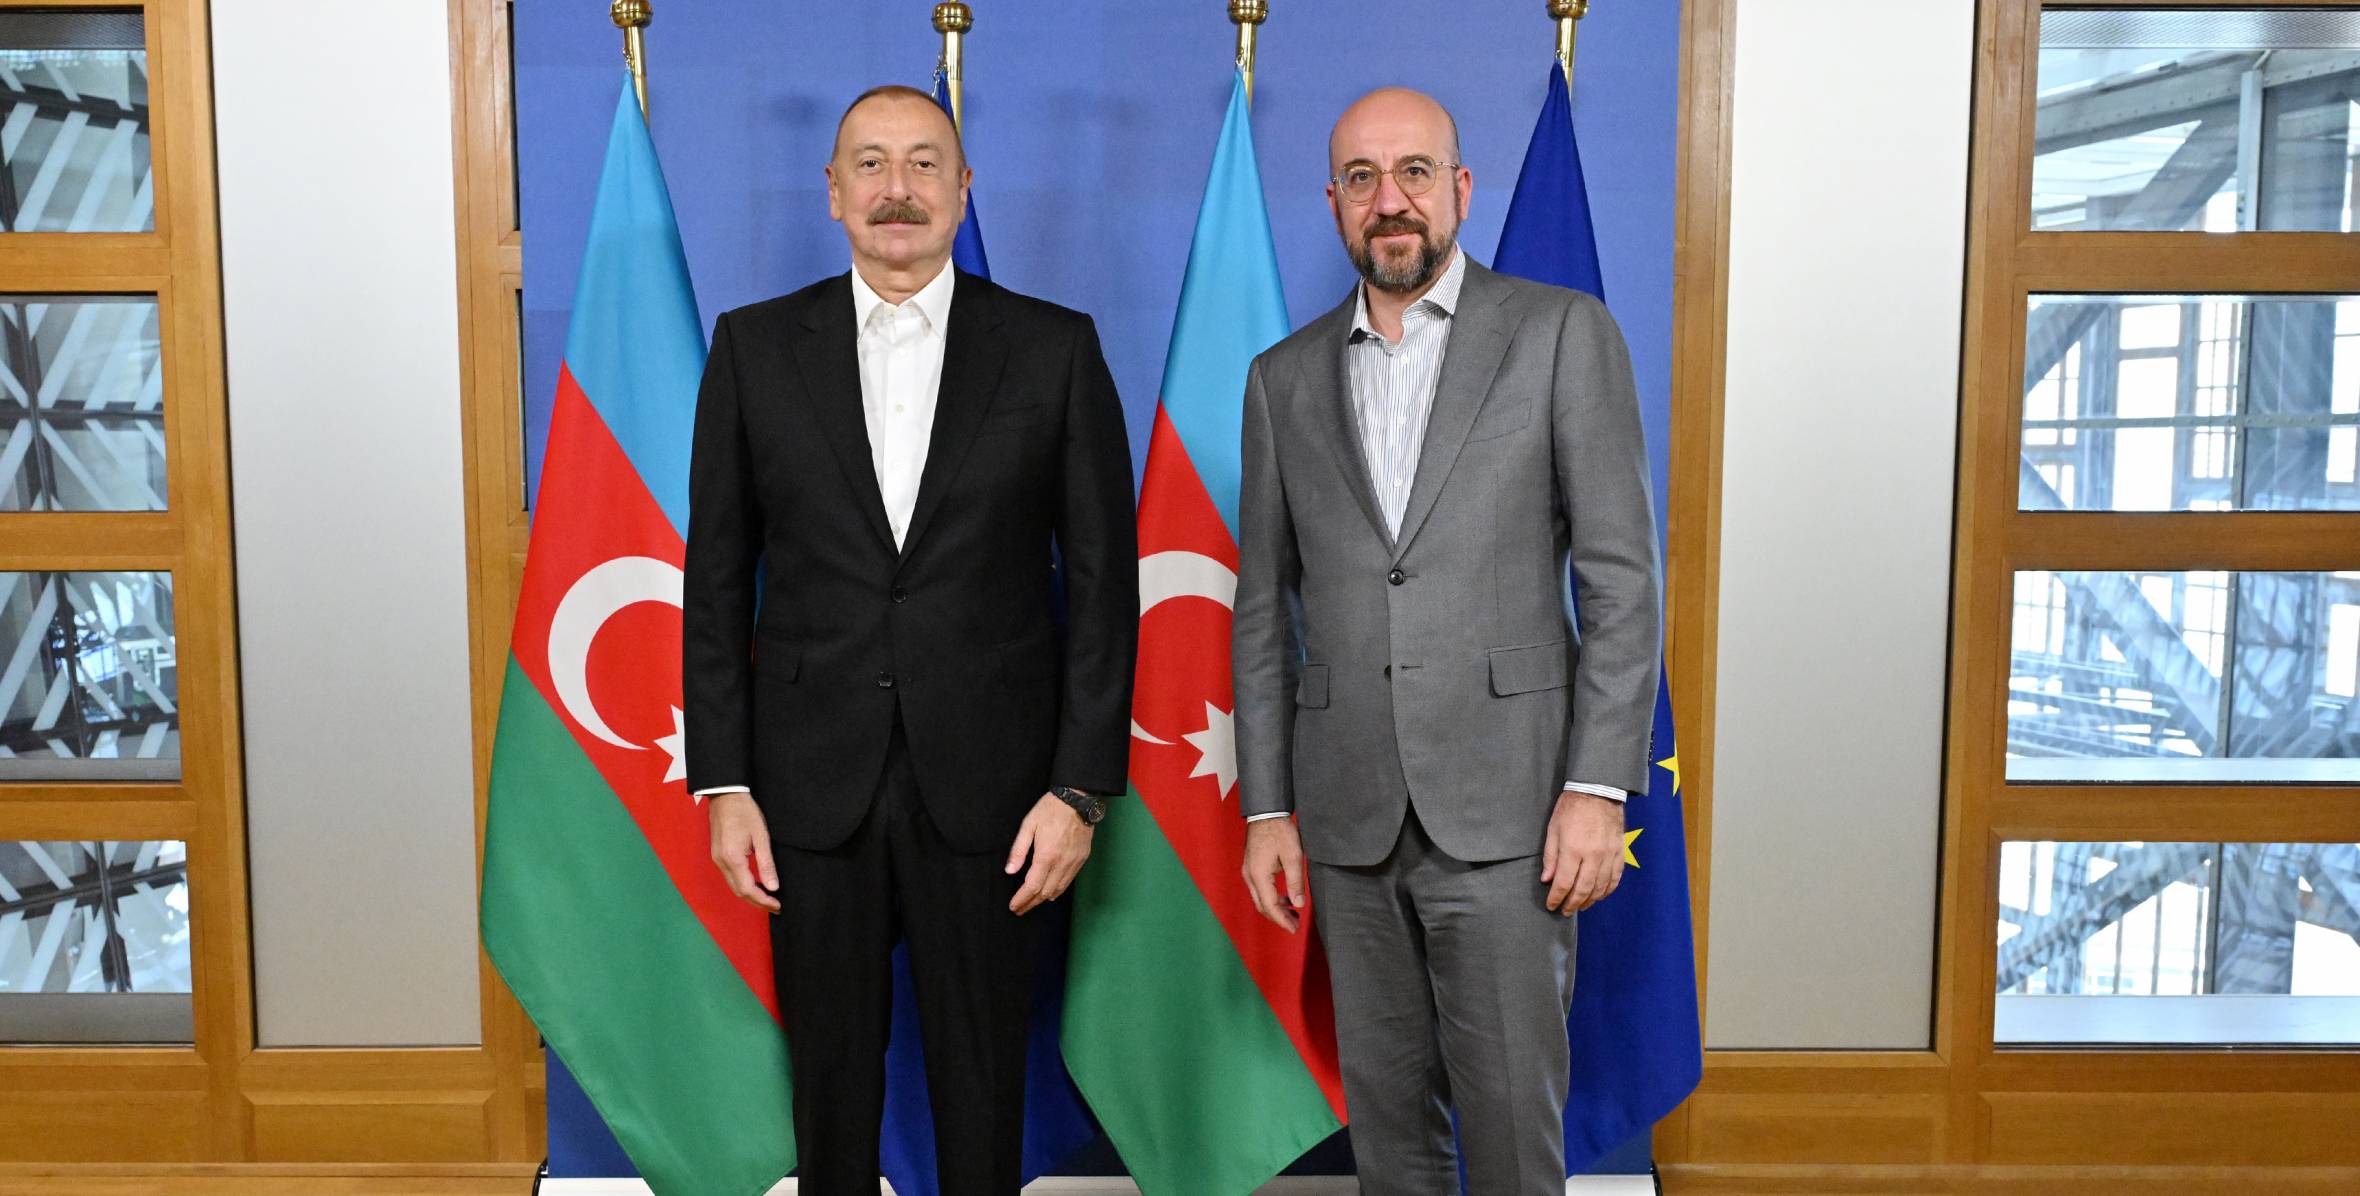 Ilham Aliyev held meeting with President of European Council Charles Michel in Brussels